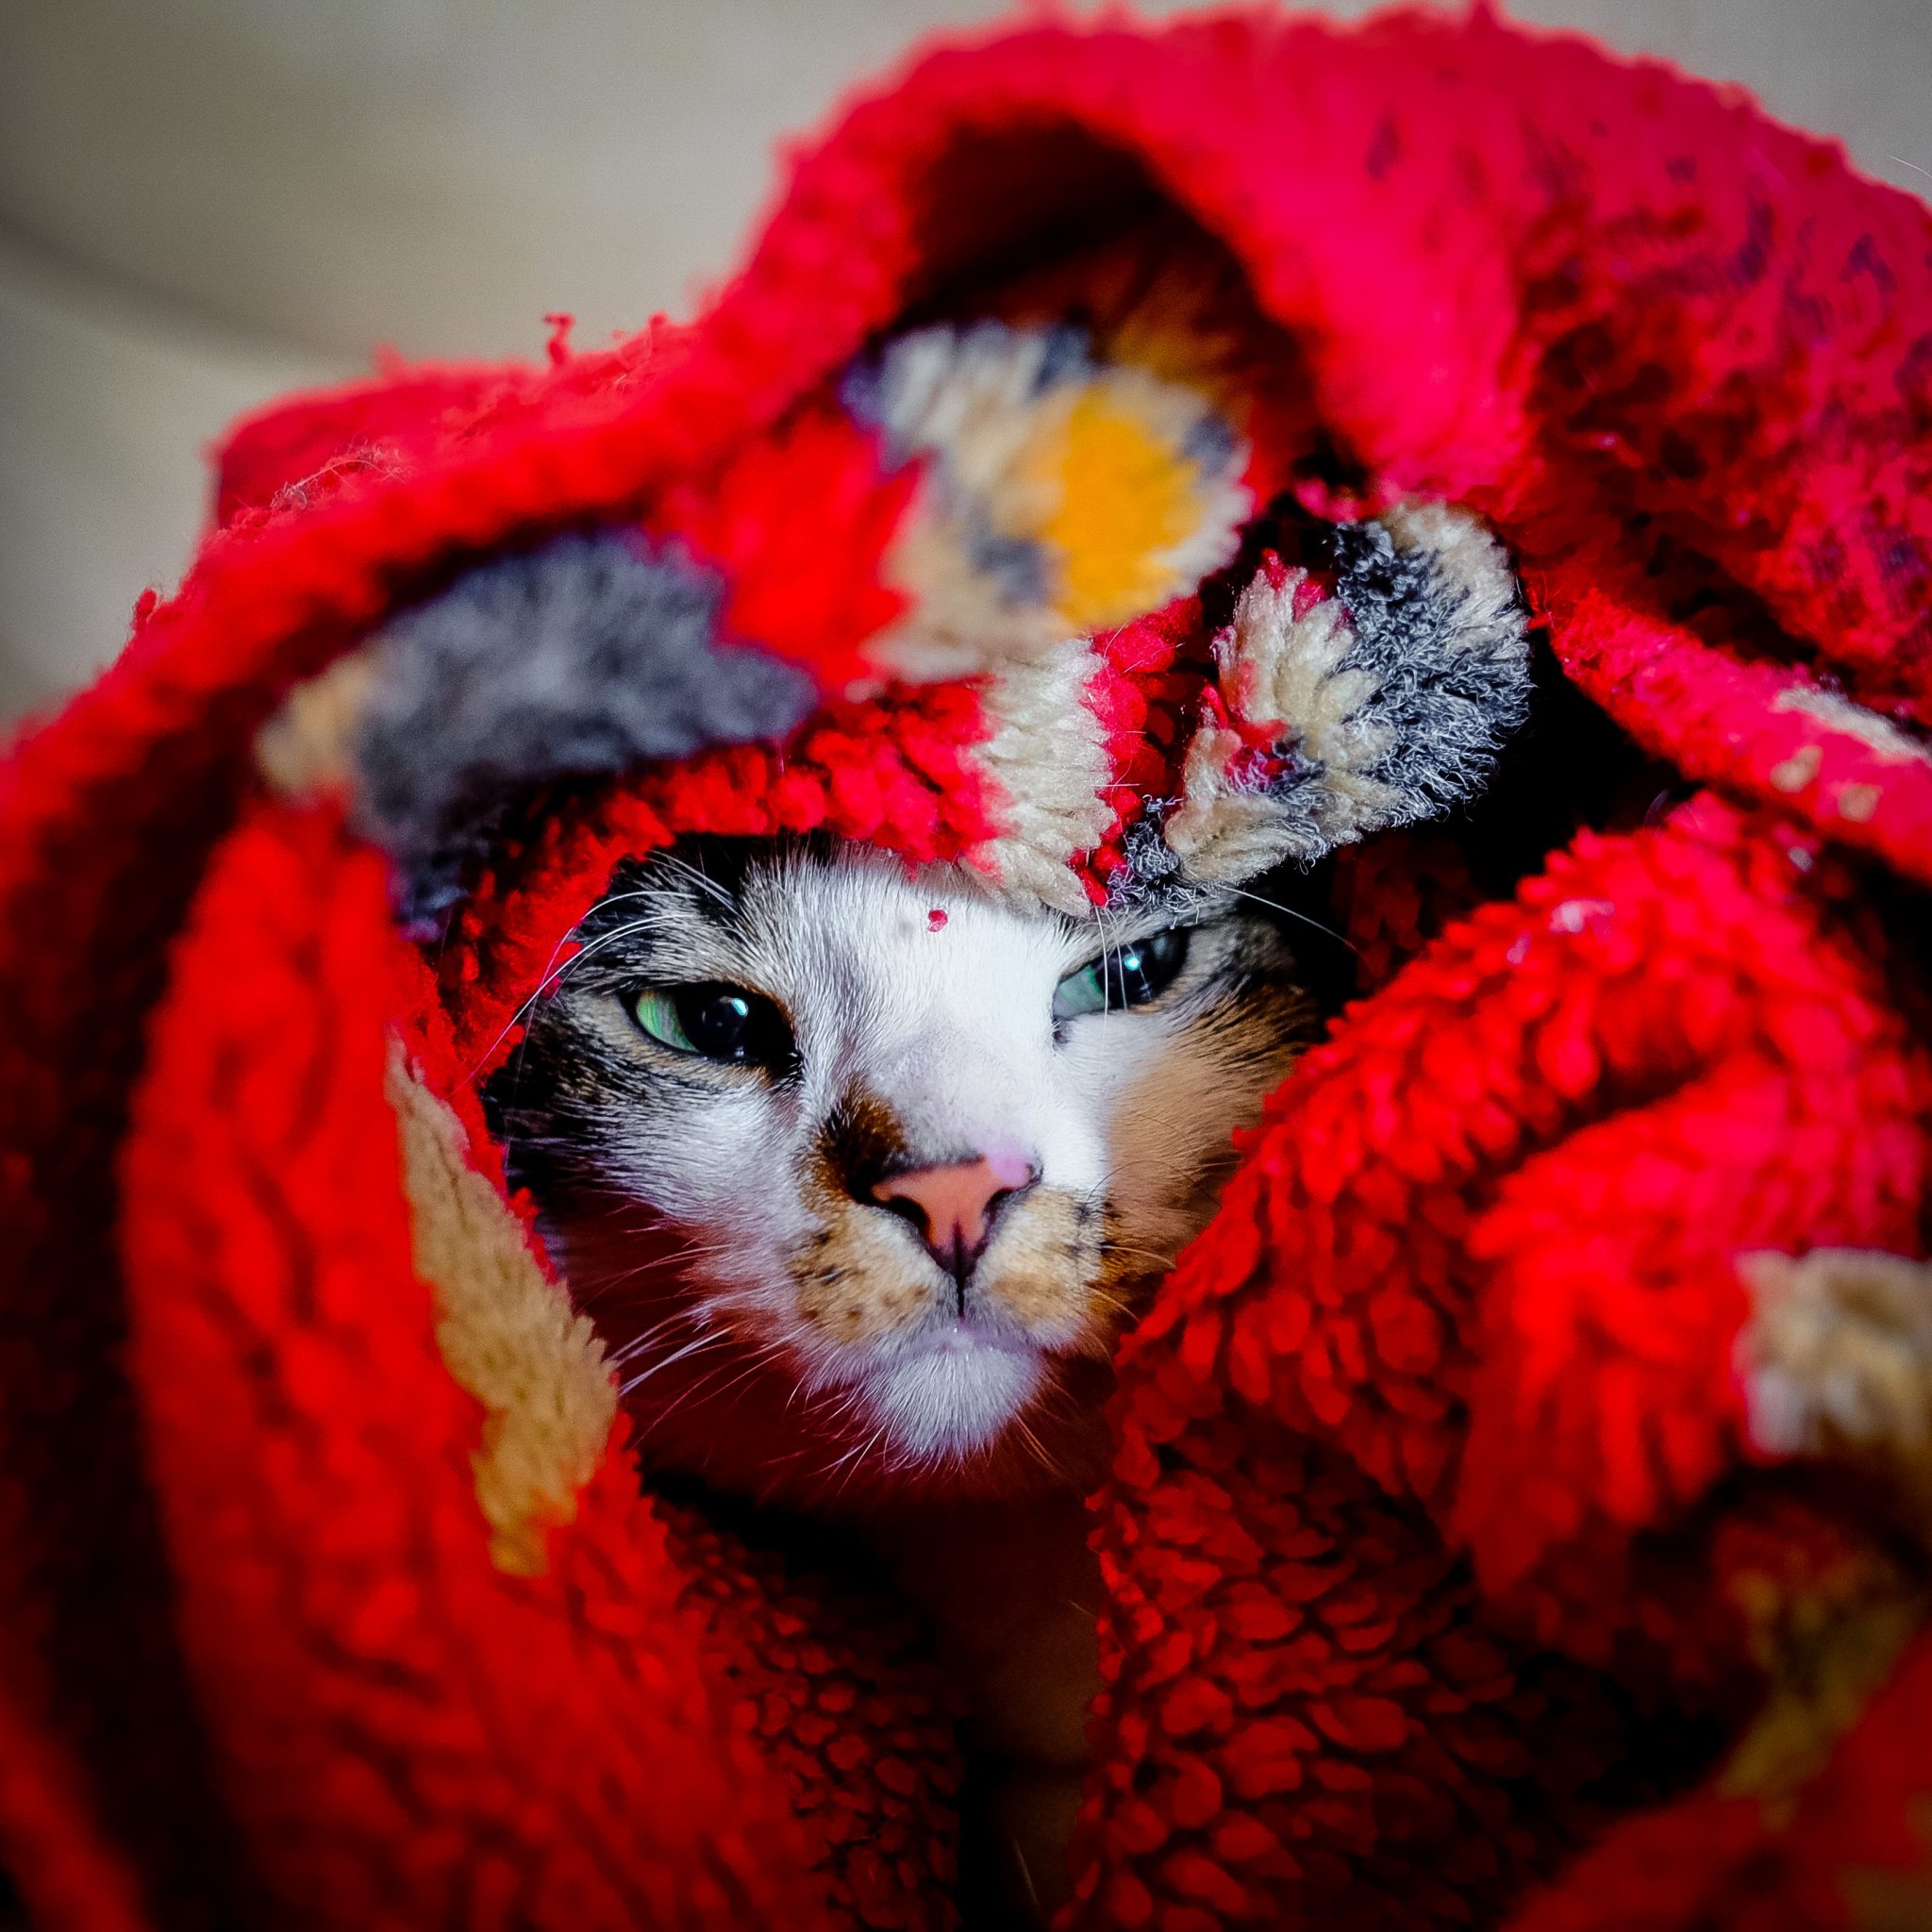 cat face snuggled in a red, patterned blanket